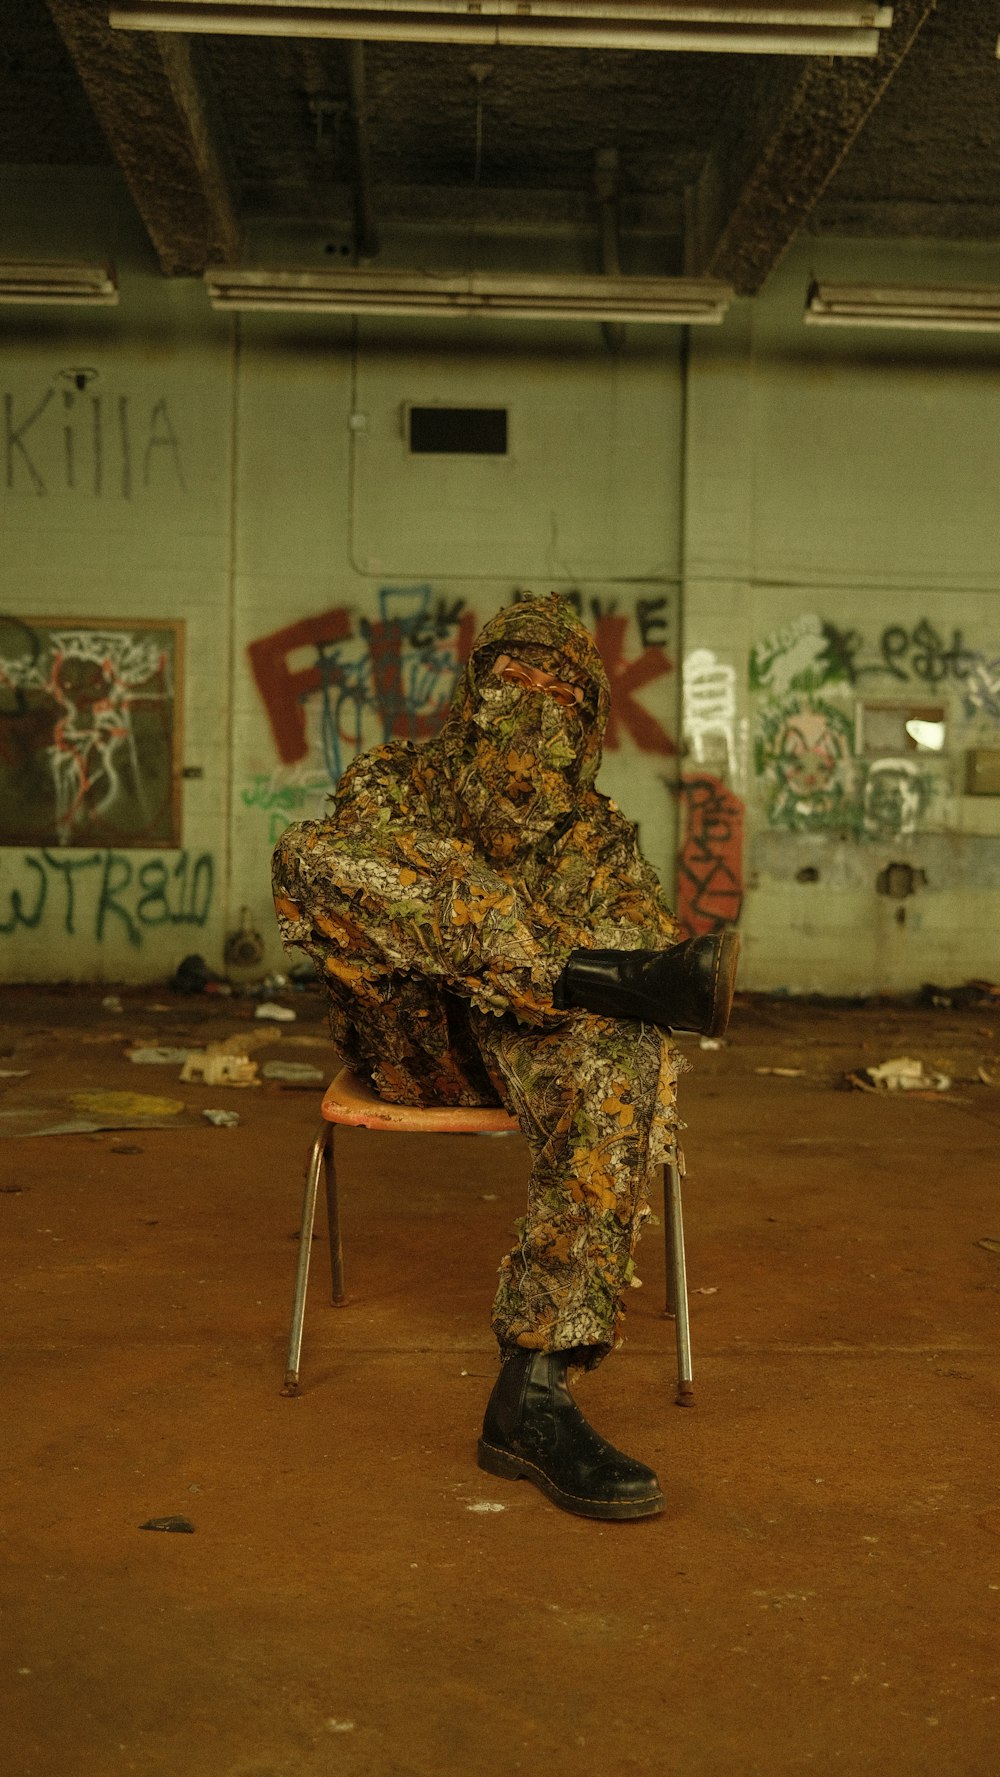 a person sitting on a chair in a room with graffiti on the walls